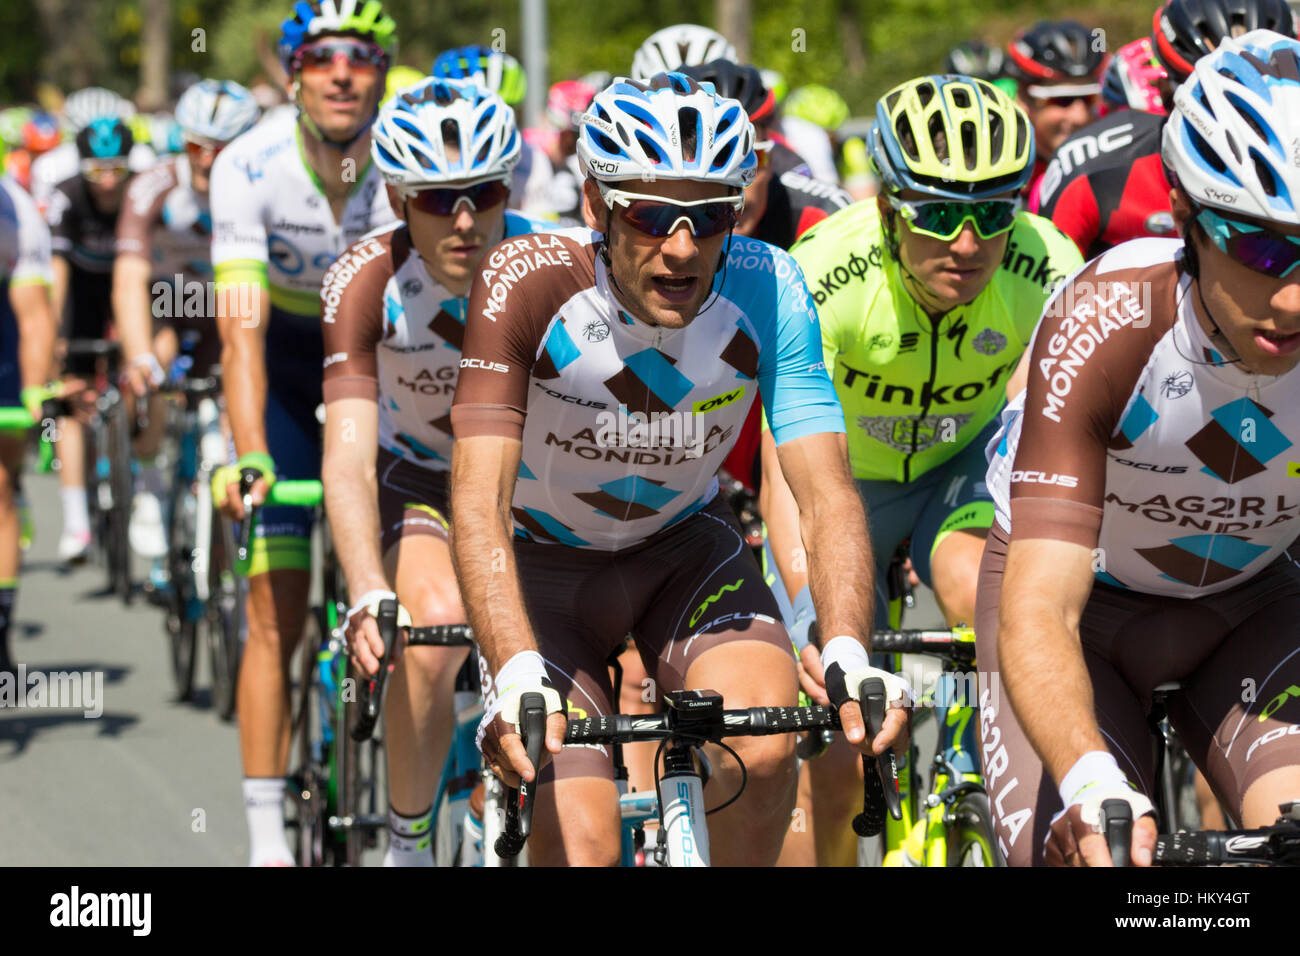 Cyclists of Team AG2R La Mondiale among others during the second stage of Giro d'Italia 2016 in Beuningen, The Netherlands Stock Photo